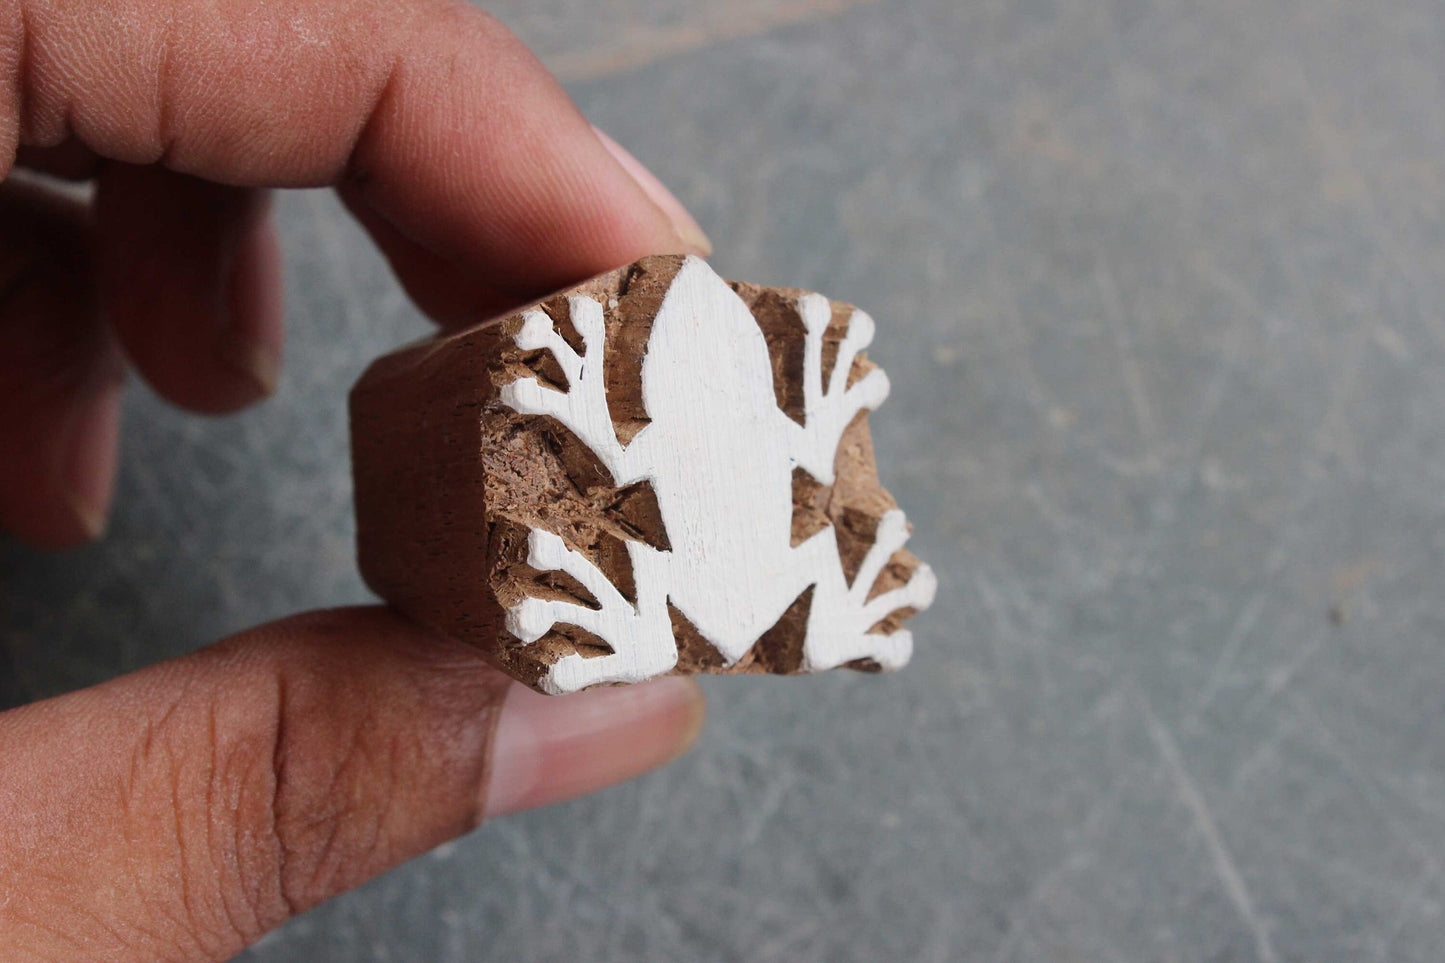 Easter Egg Block Print Stamp Indian Fabric Block Stamp Egg Wood Block Stamp Indian Textile Printing Block For Printing Festival Soap Stamp